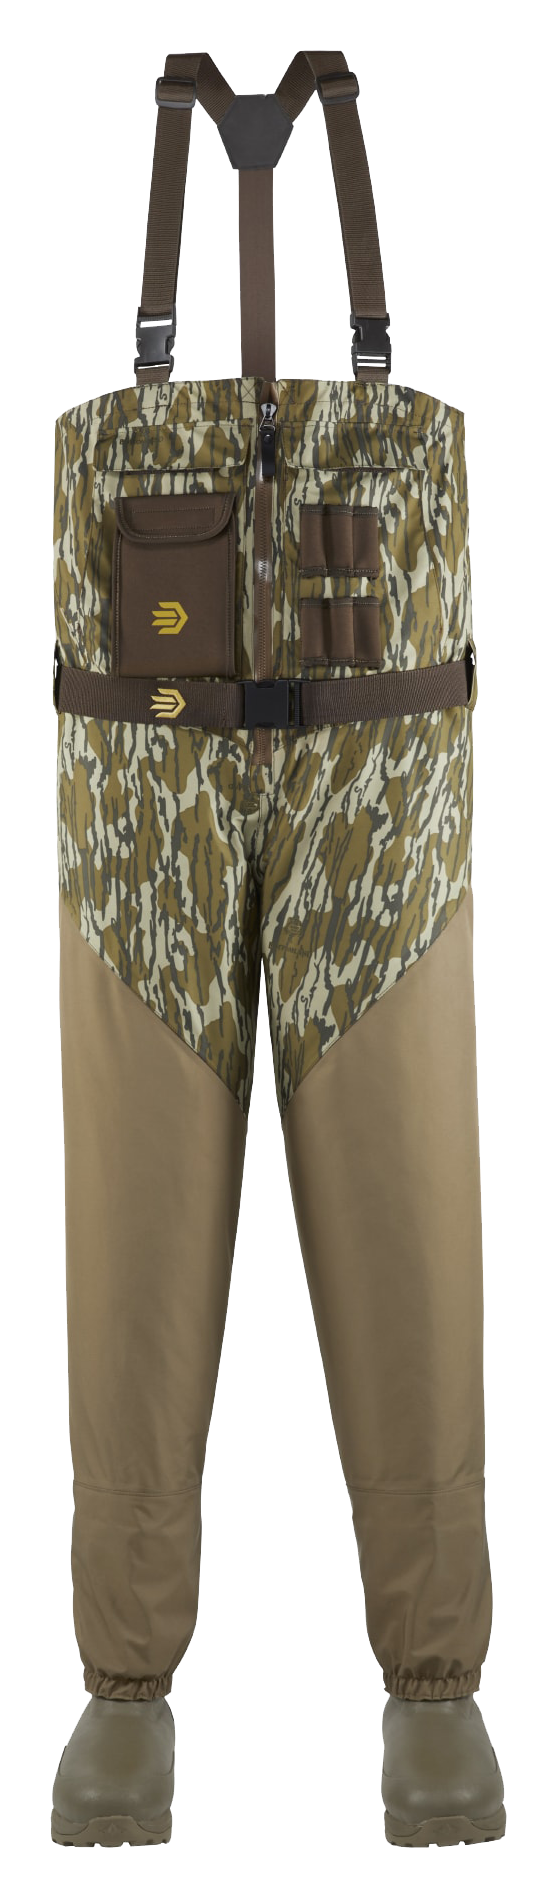 LaCrosse Alpha Agility Select Insulated Front-Zip Breathable Hunting Waders for Men - Mossy Oak Original Bottomland - 12/Stout